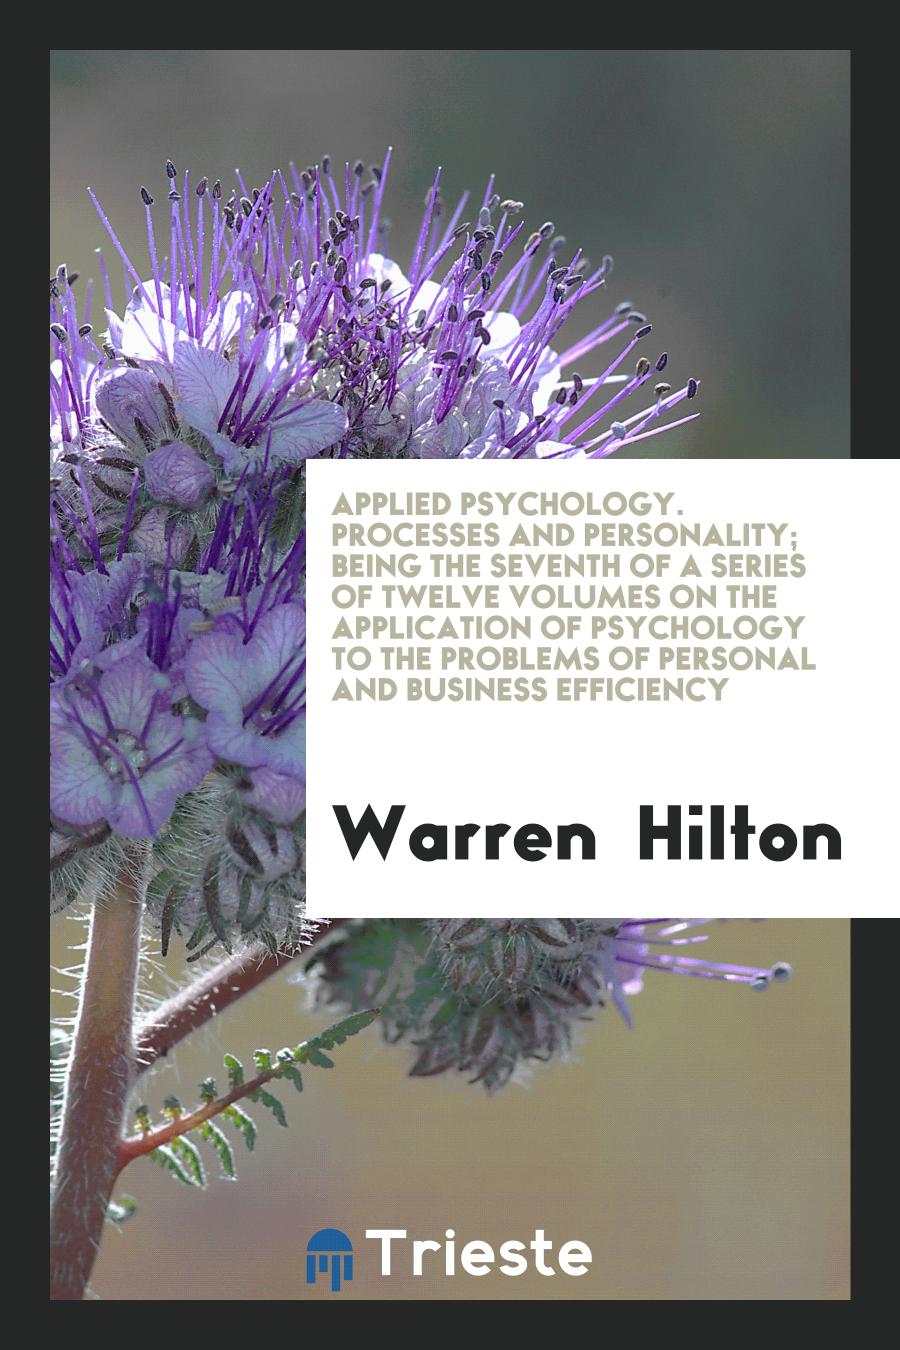 Applied Psychology. Processes and Personality; Being the Seventh of a Series of Twelve Volumes on the Application of Psychology to the Problems of Personal and Business Efficiency